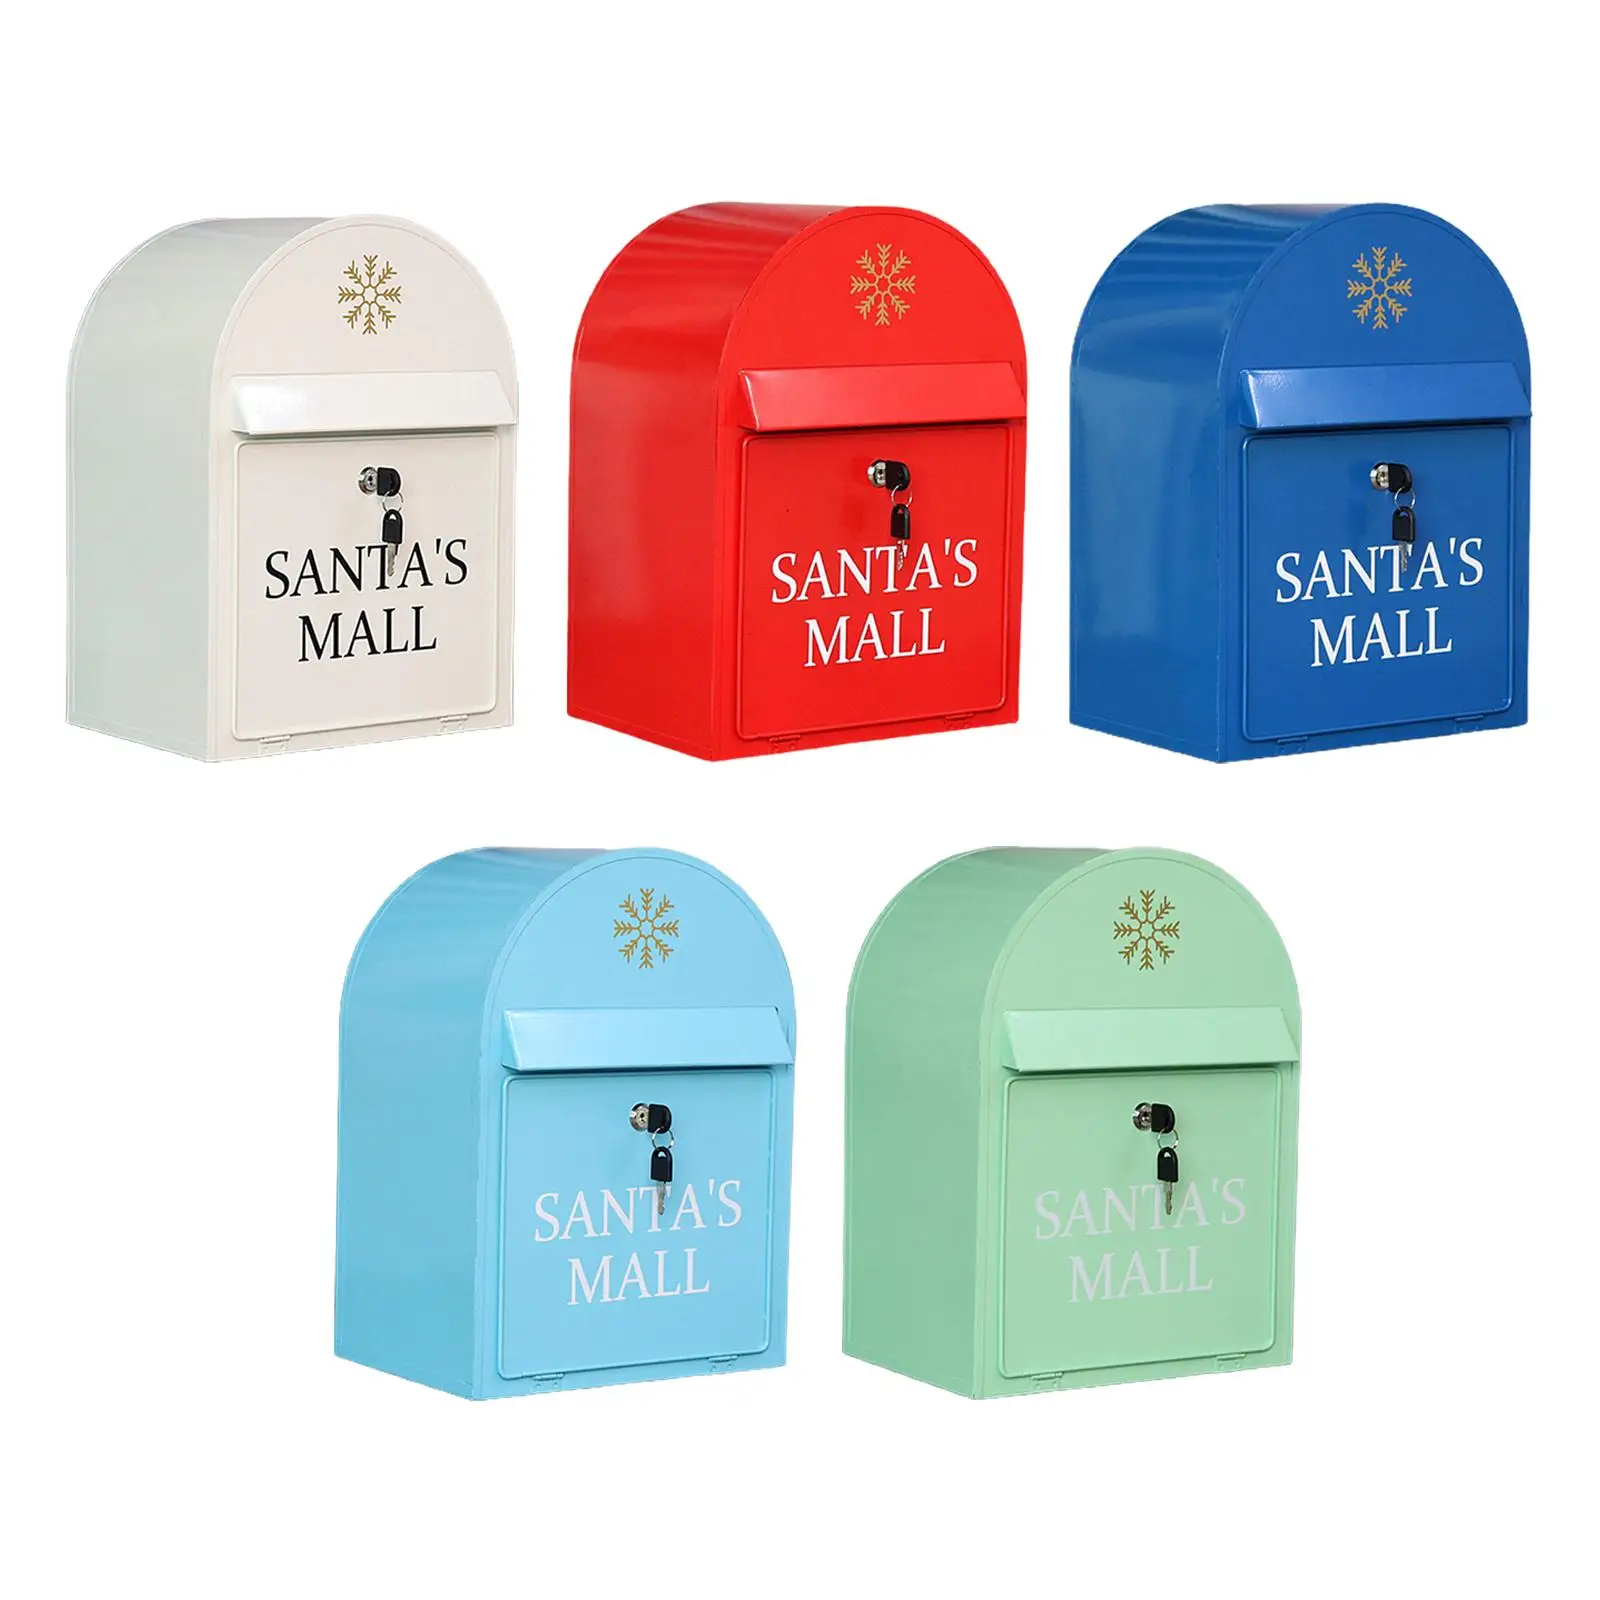 Art Lockable Mailbox Wall Mounted Deposit Suggestion Drop Box Durable Envelopes Paperwork Postbox House Room Decor